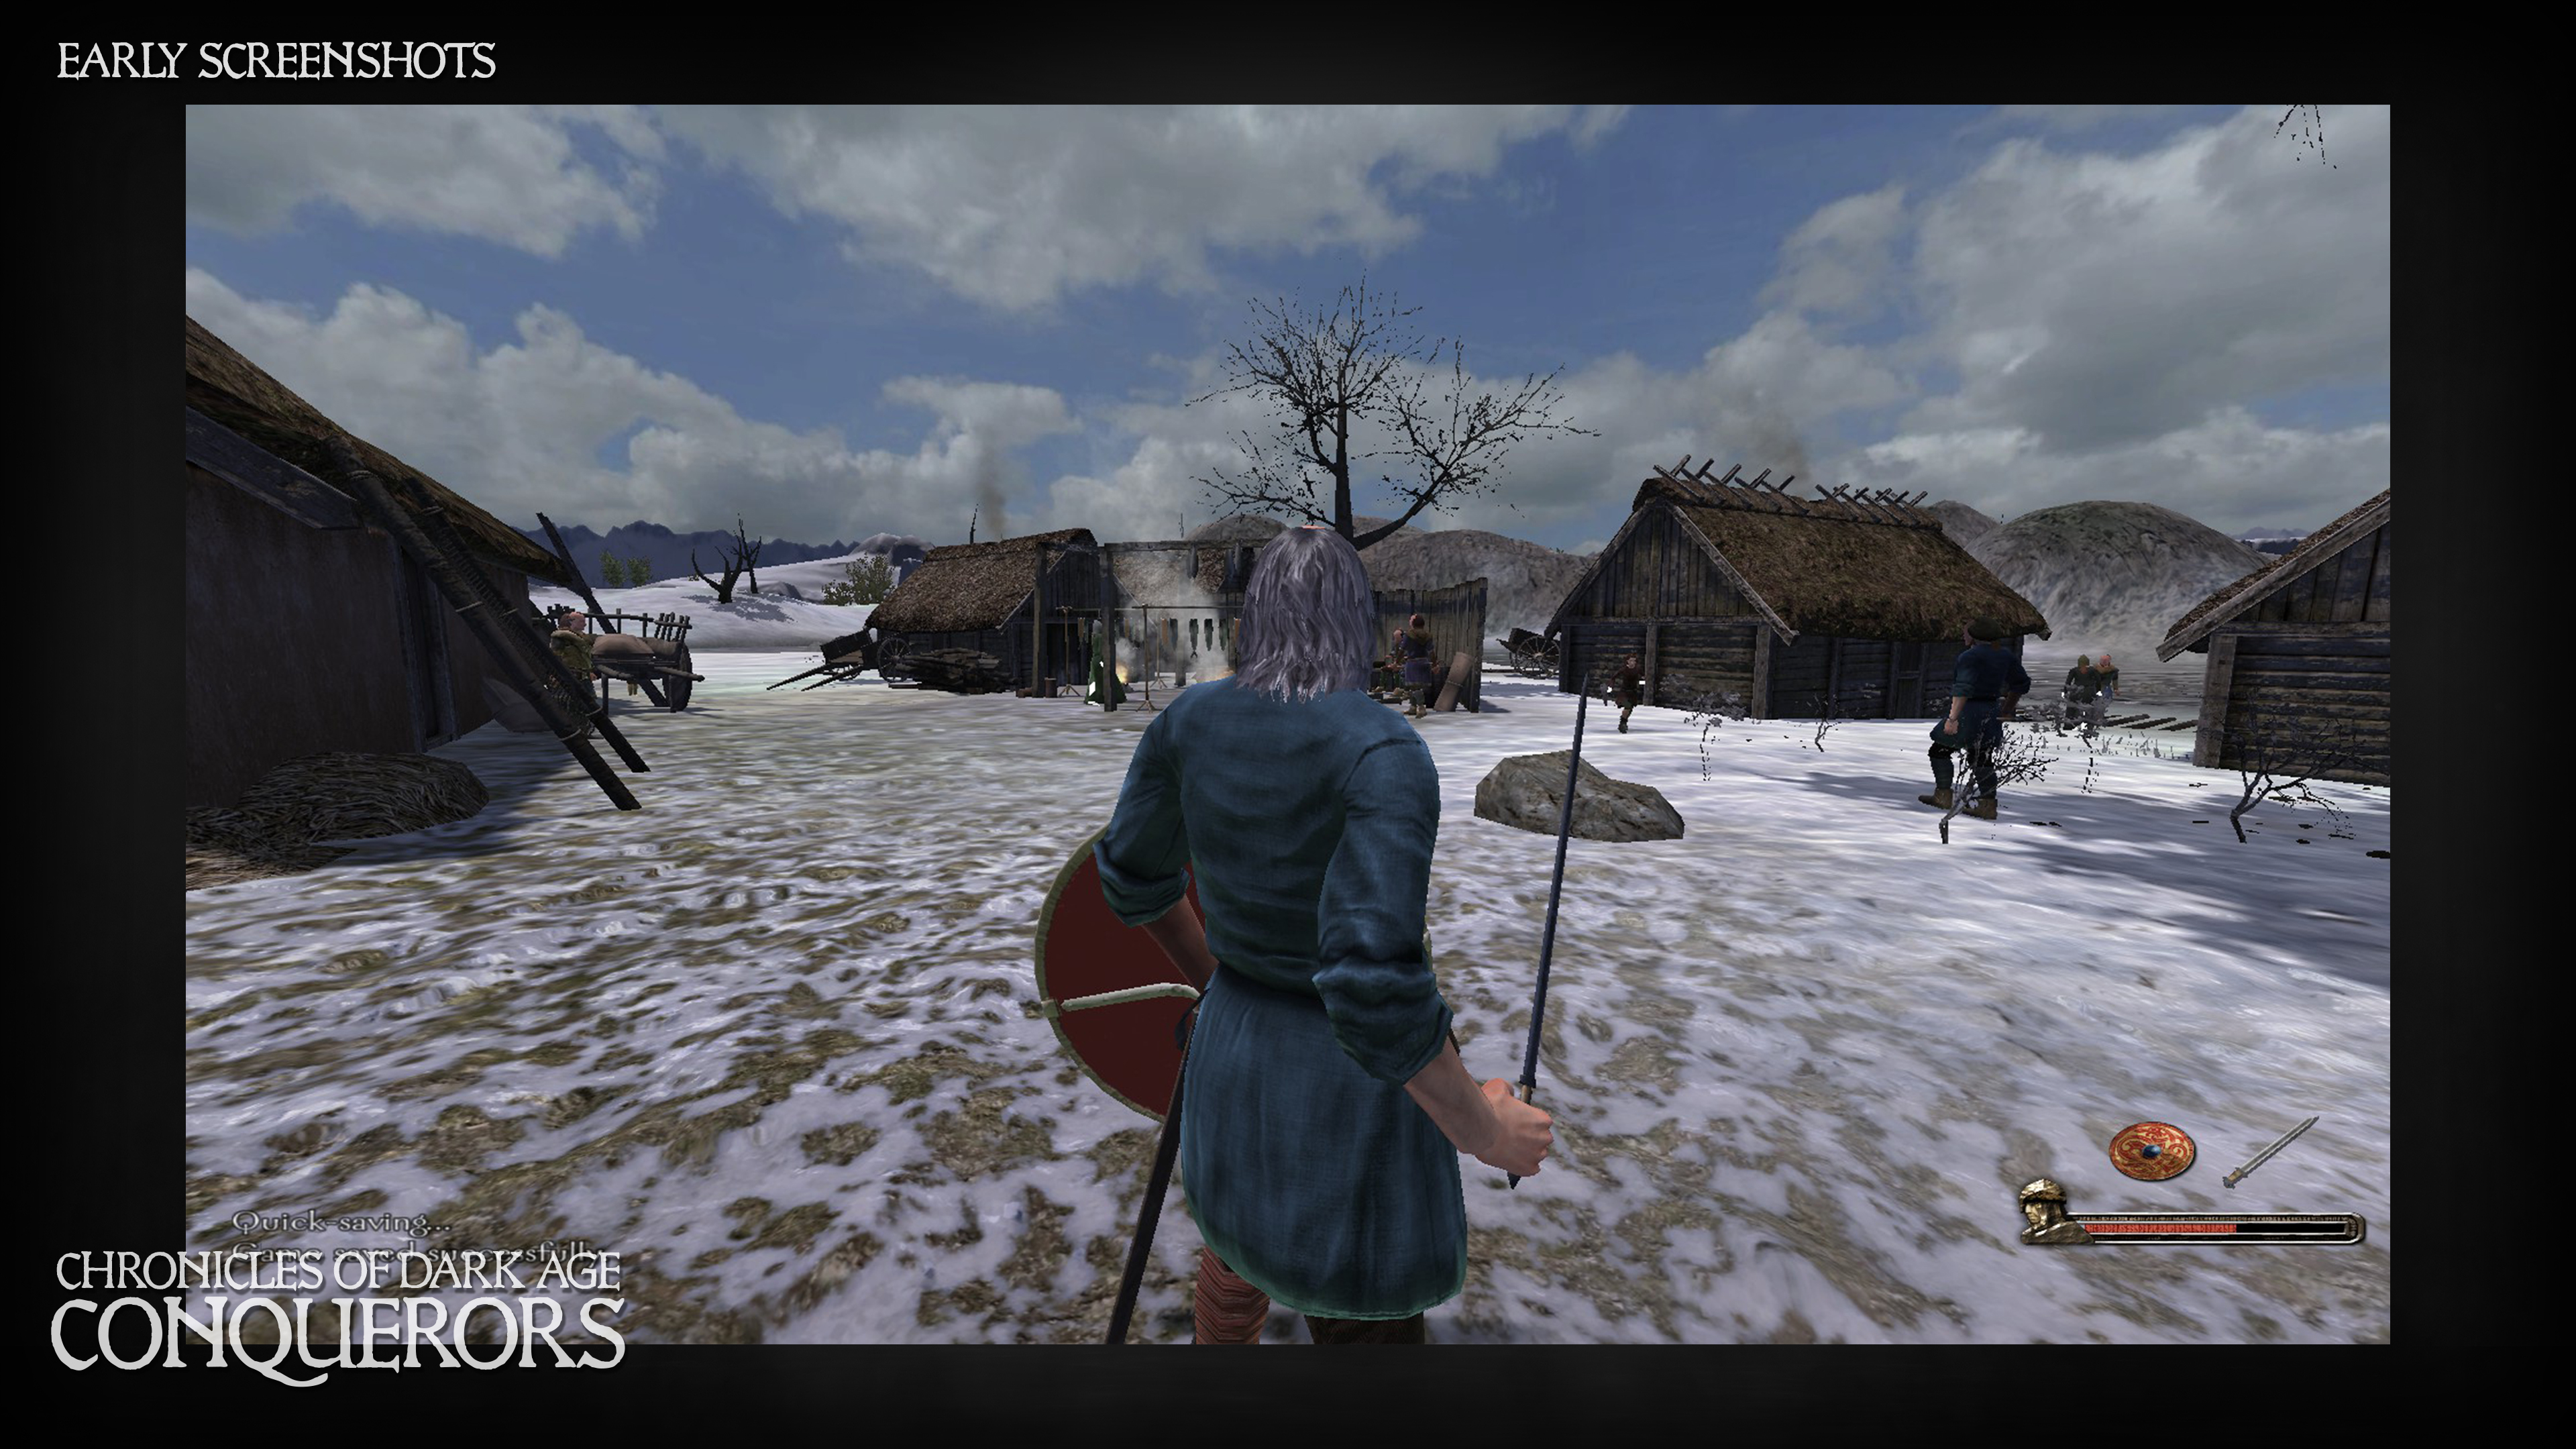 mount and blade viking conquest factions